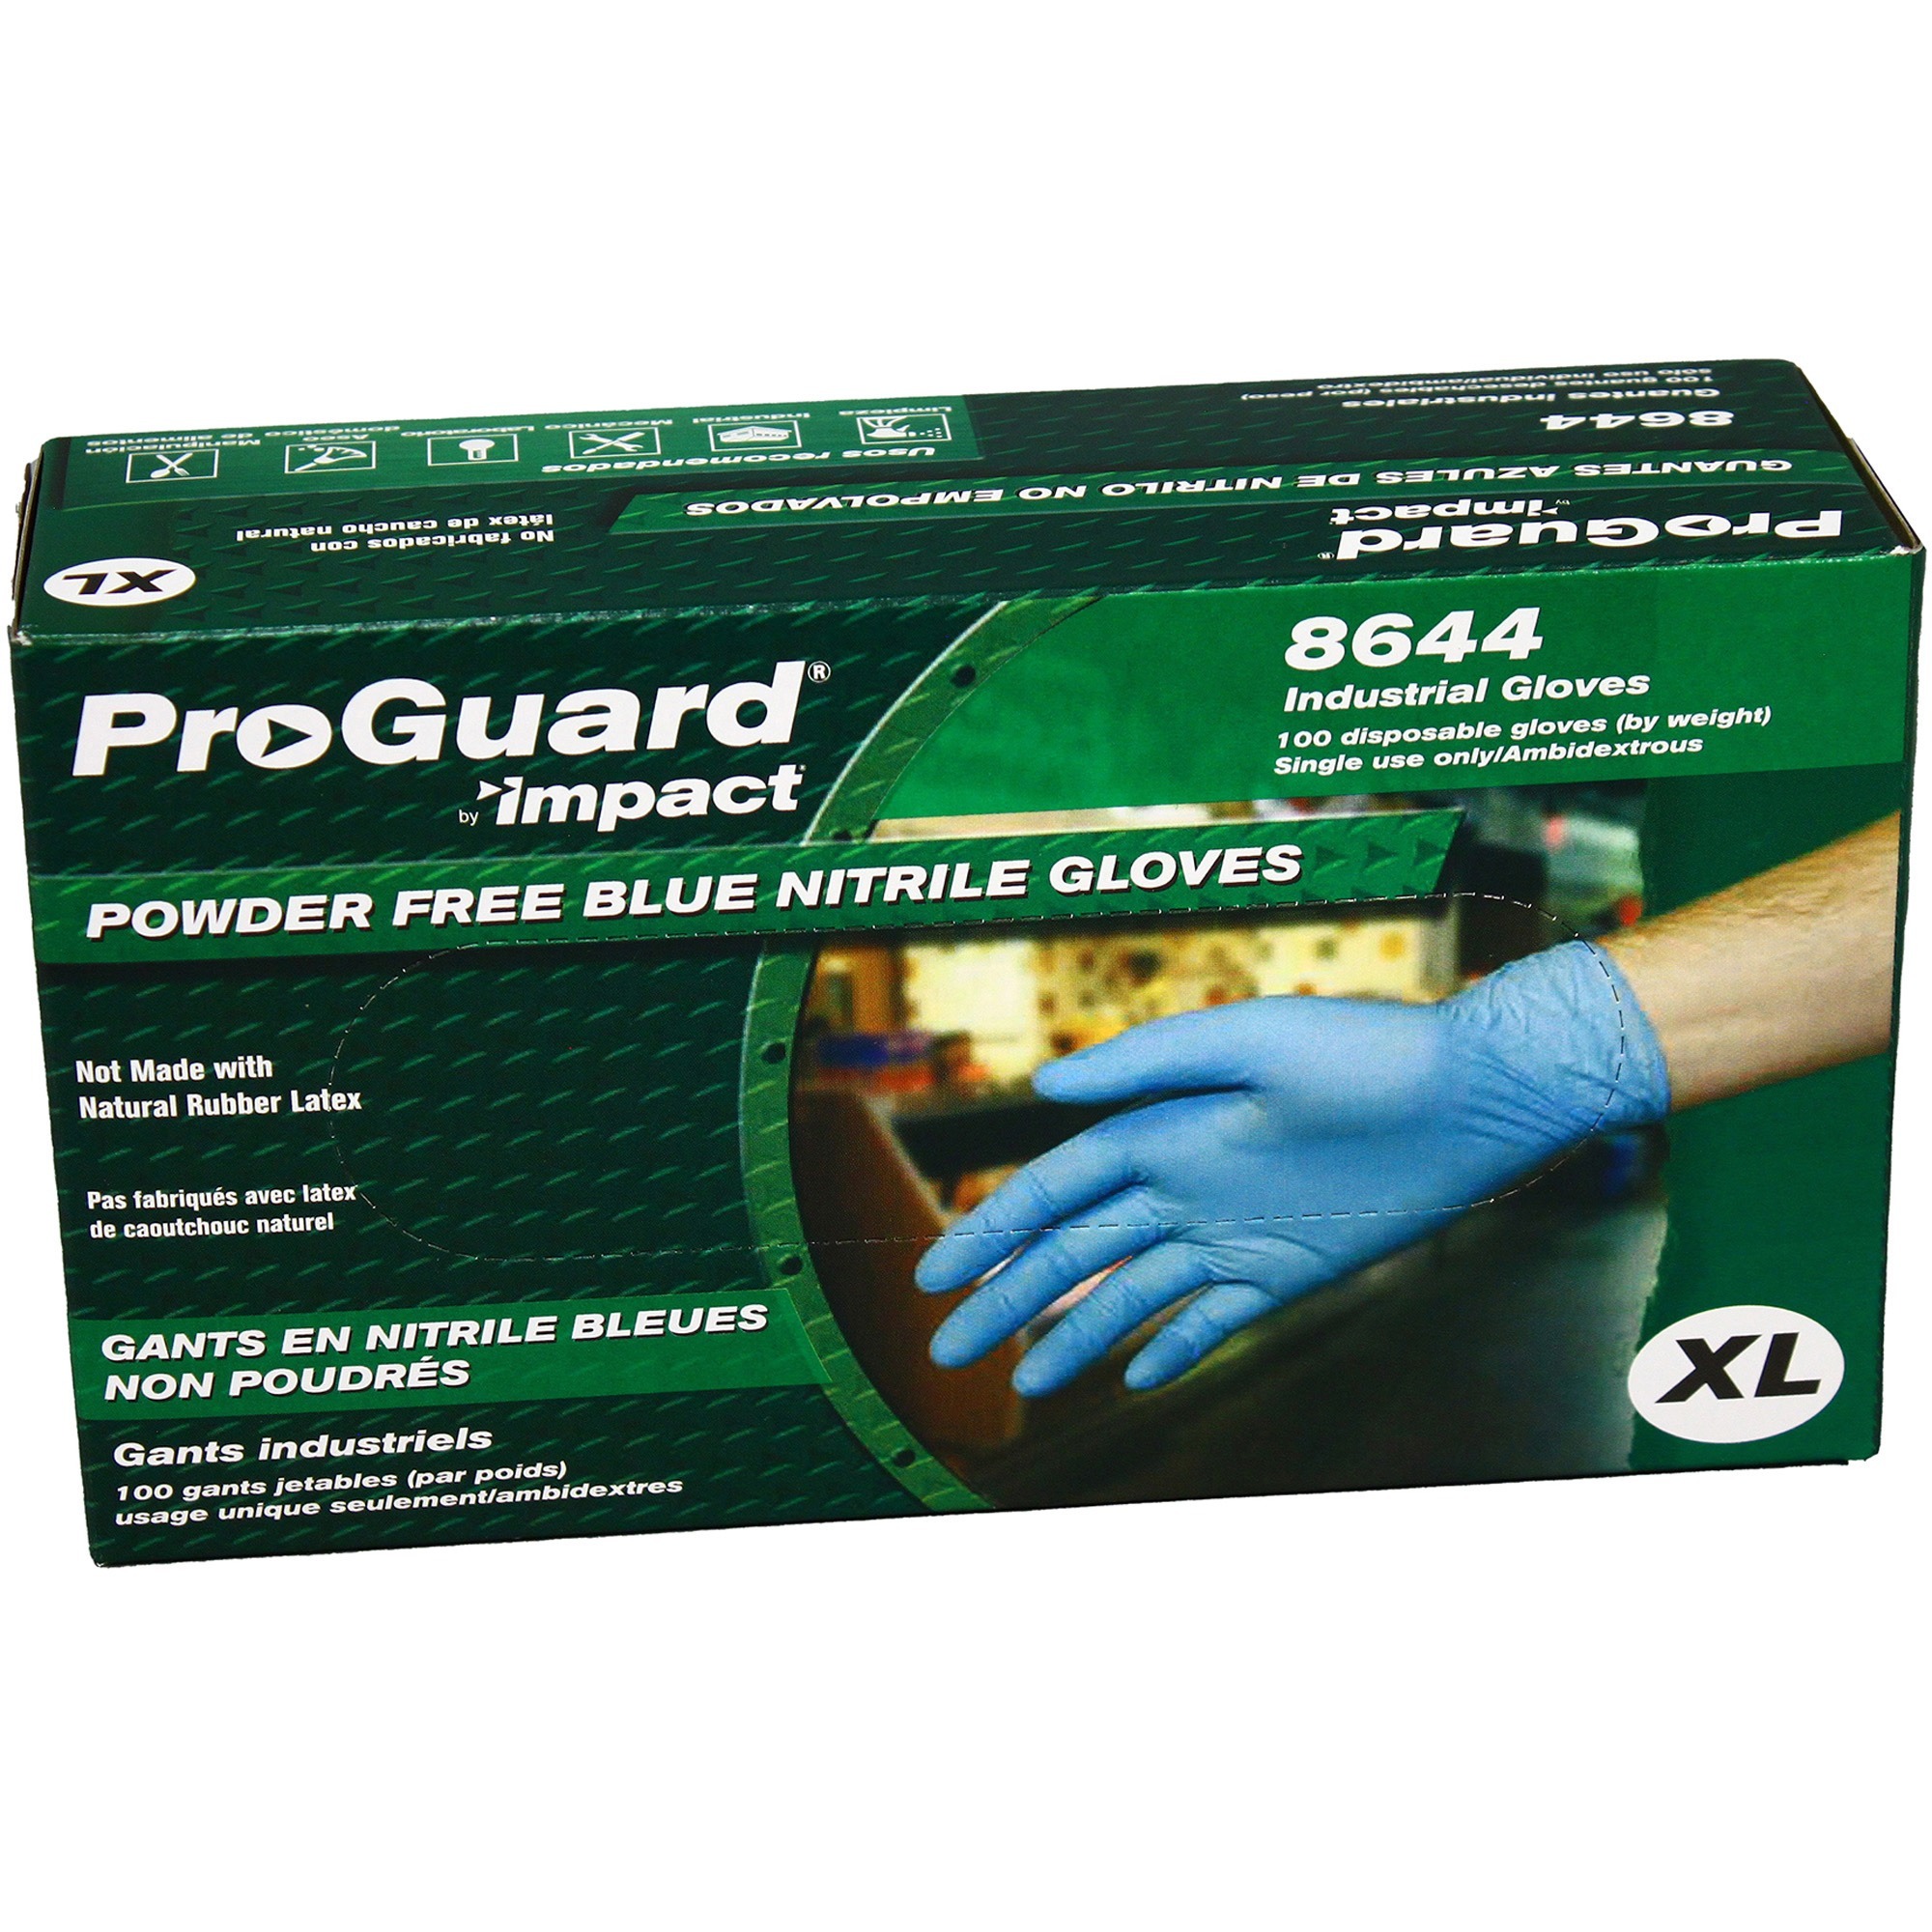 ProGuard PF Nitrile General Purpose Gloves - X-Large Size - Unisex - Nitrile - Blue - Ambidextrous, Puncture Resistant, Disposable, Powder-free, Allergen-free, Beaded Cuff, Comfortable, Textured Grip - For Chemical, Laboratory Application, Food Handling, 